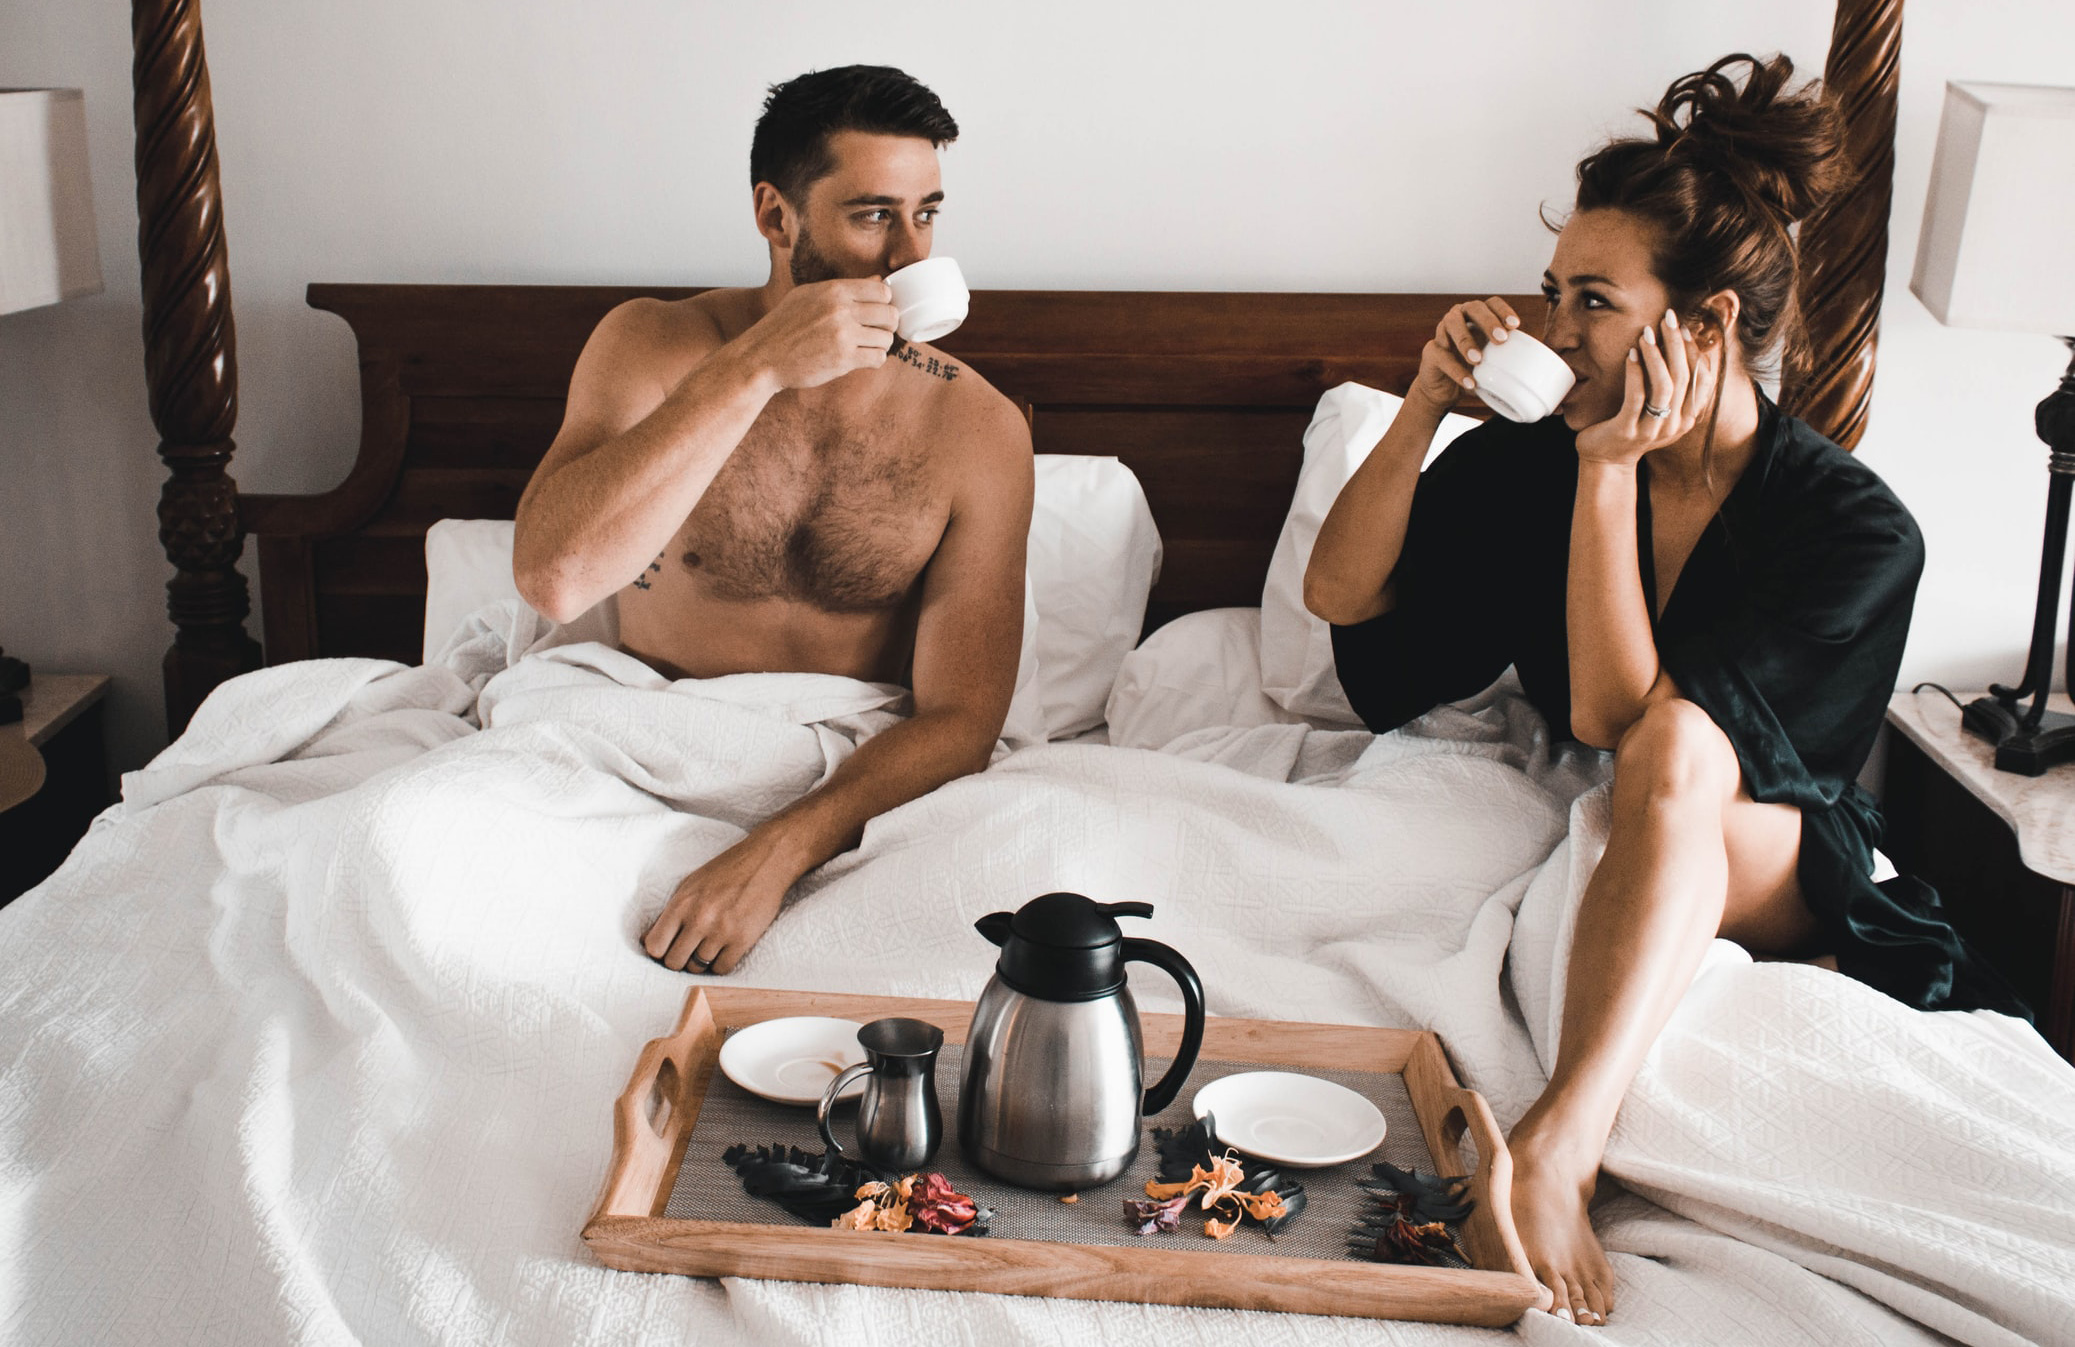 Couple having breakfast in bed, celebrating intimacy in longterm relationships